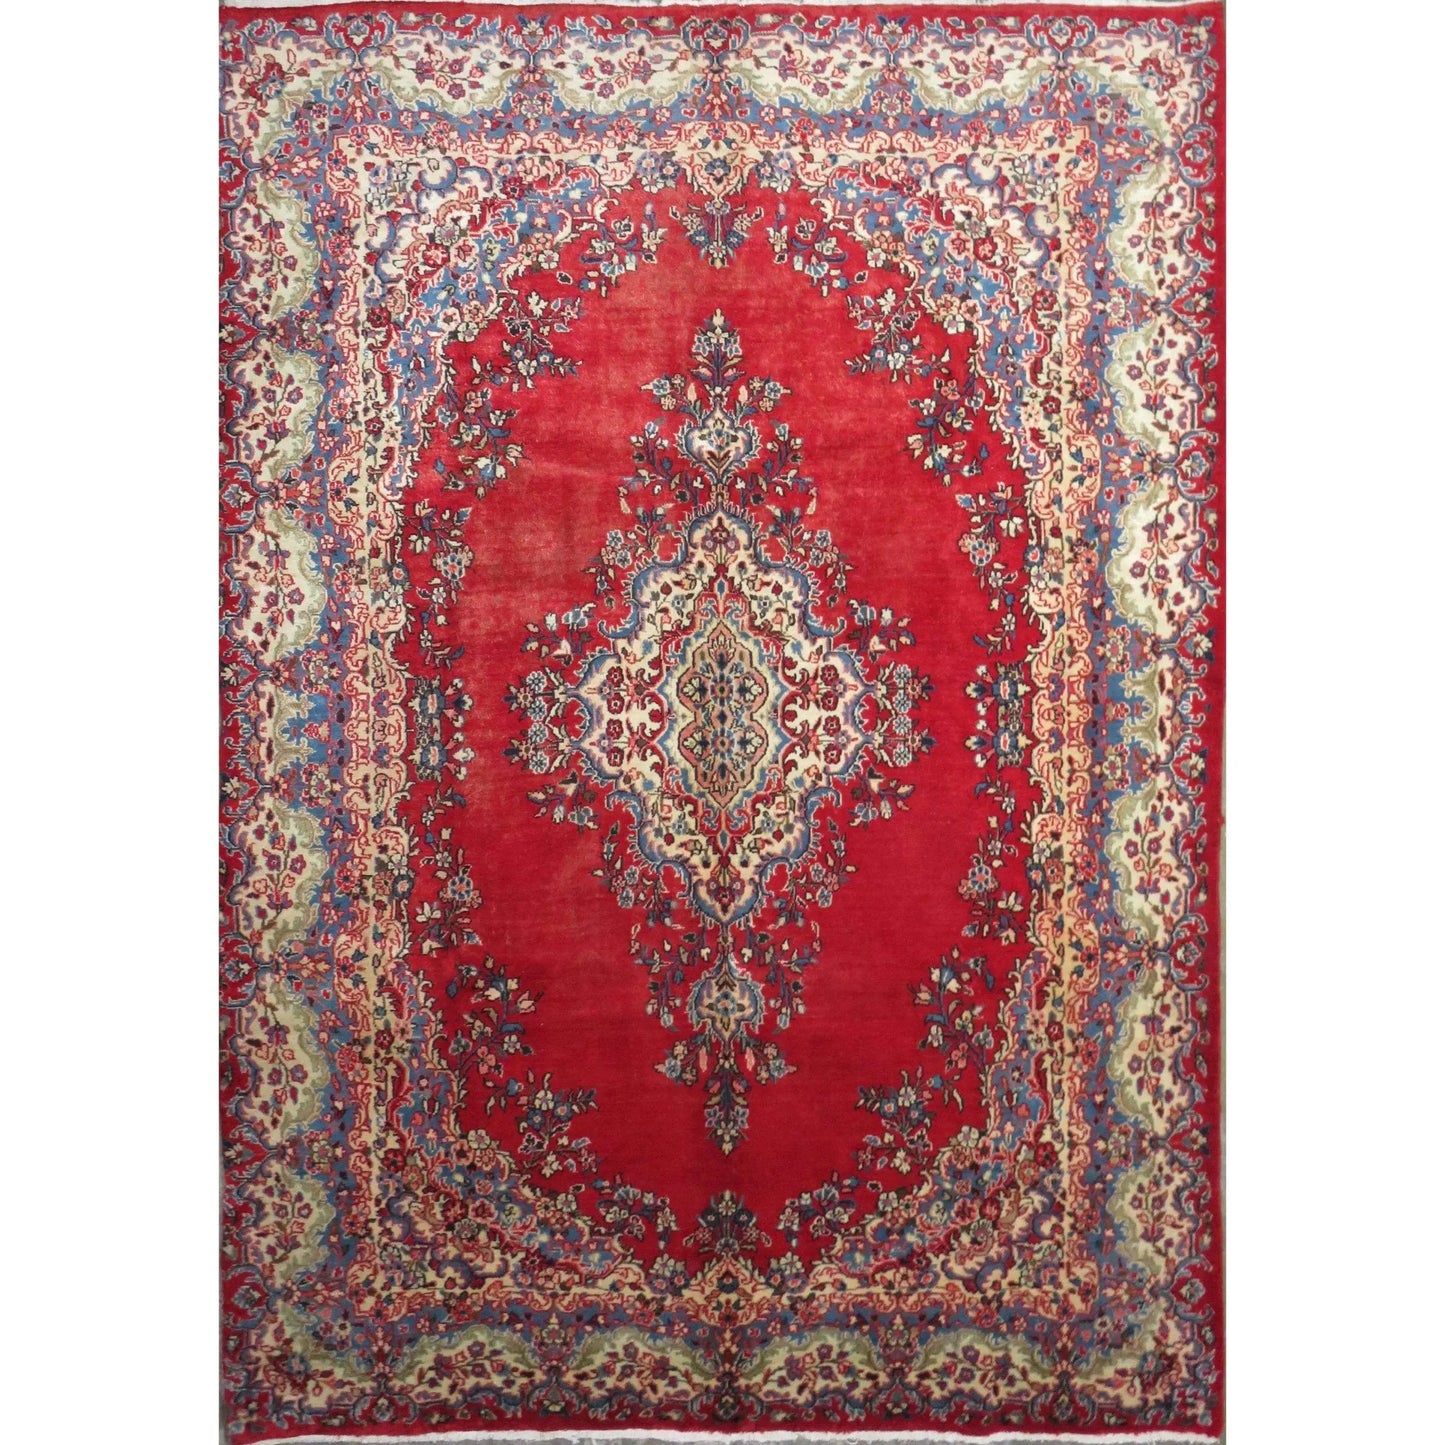 Hand-Knotted Persian Wool Rug _ Luxurious Vintage Design, 10'9" x 7'8", Artisan Crafted